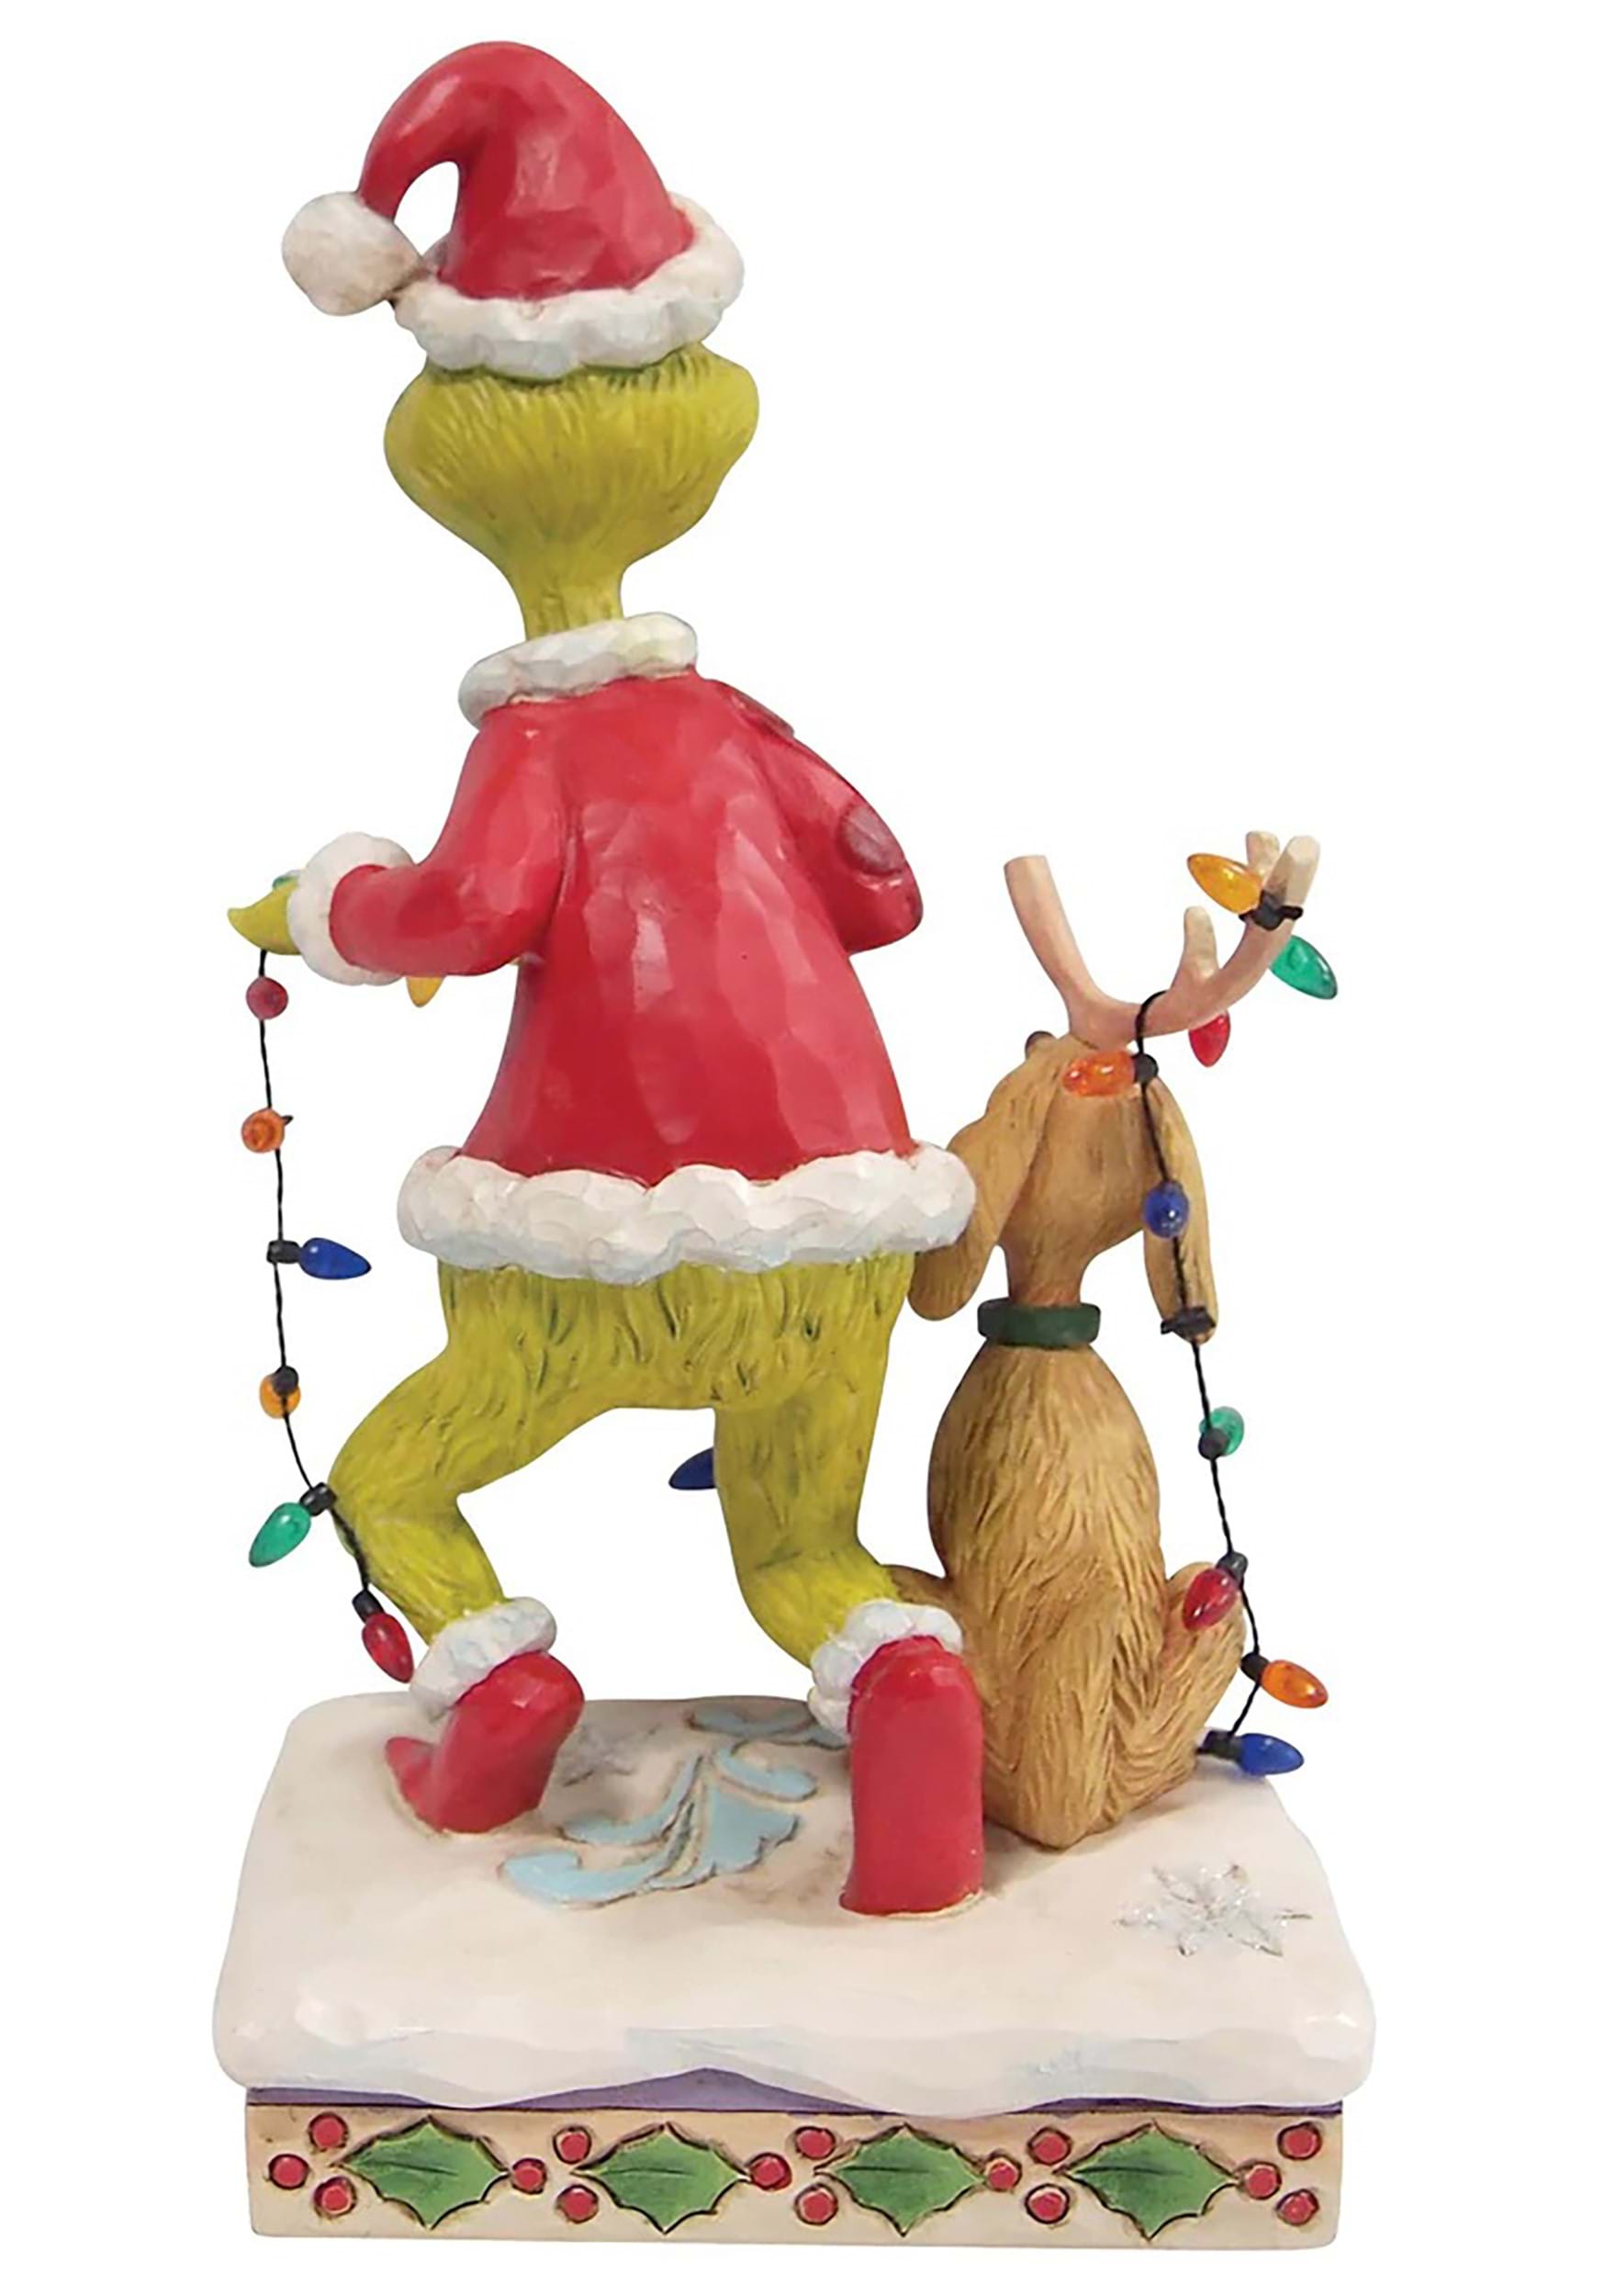 Figurine Stitch Wrapped in Christmas lights by Jim Shore